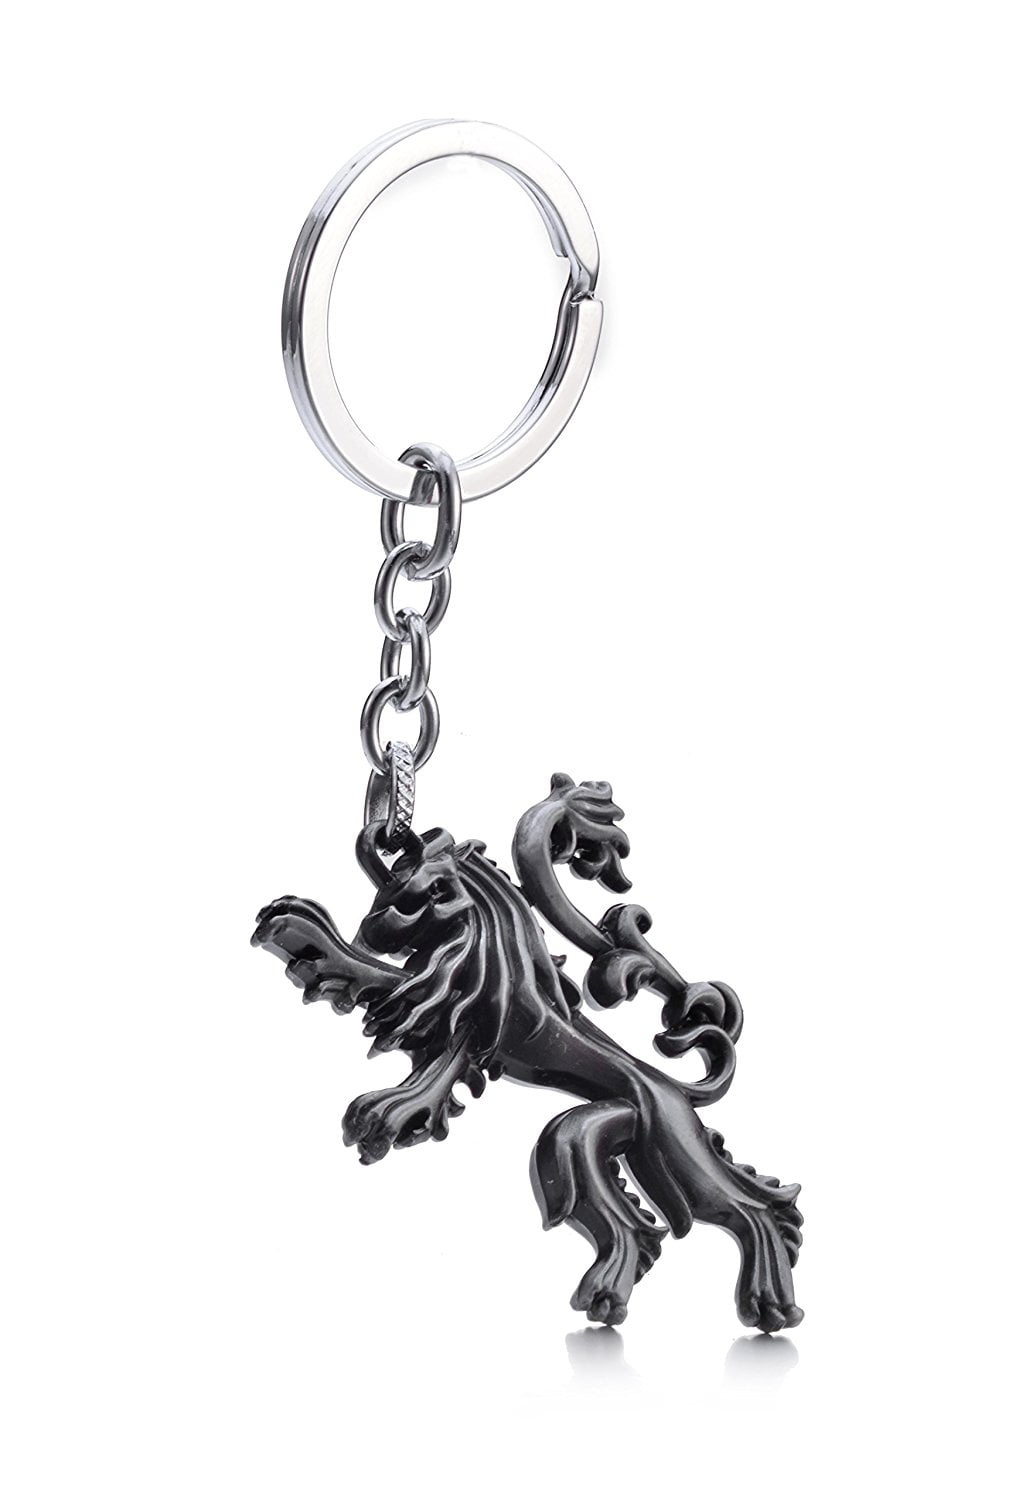 HBO Lannister Lion Game of Thrones Crest Keychain RARE Key Chain Porte-clé 